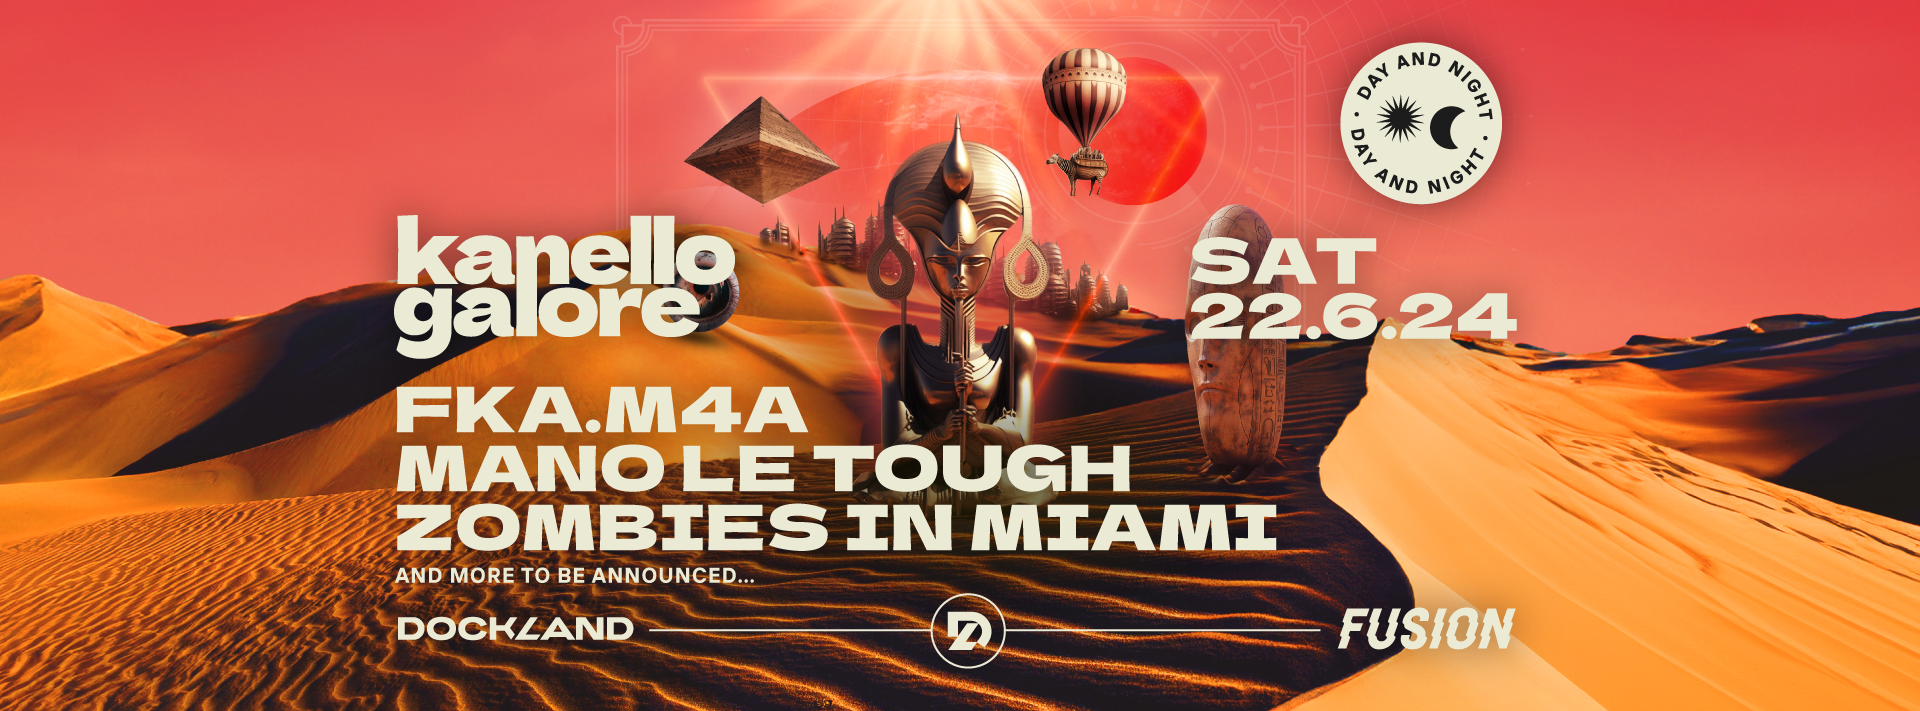 Kanello Galore Day & Night with fka.m4a, Mano Le Tough, Zombies In Miami - フライヤー表